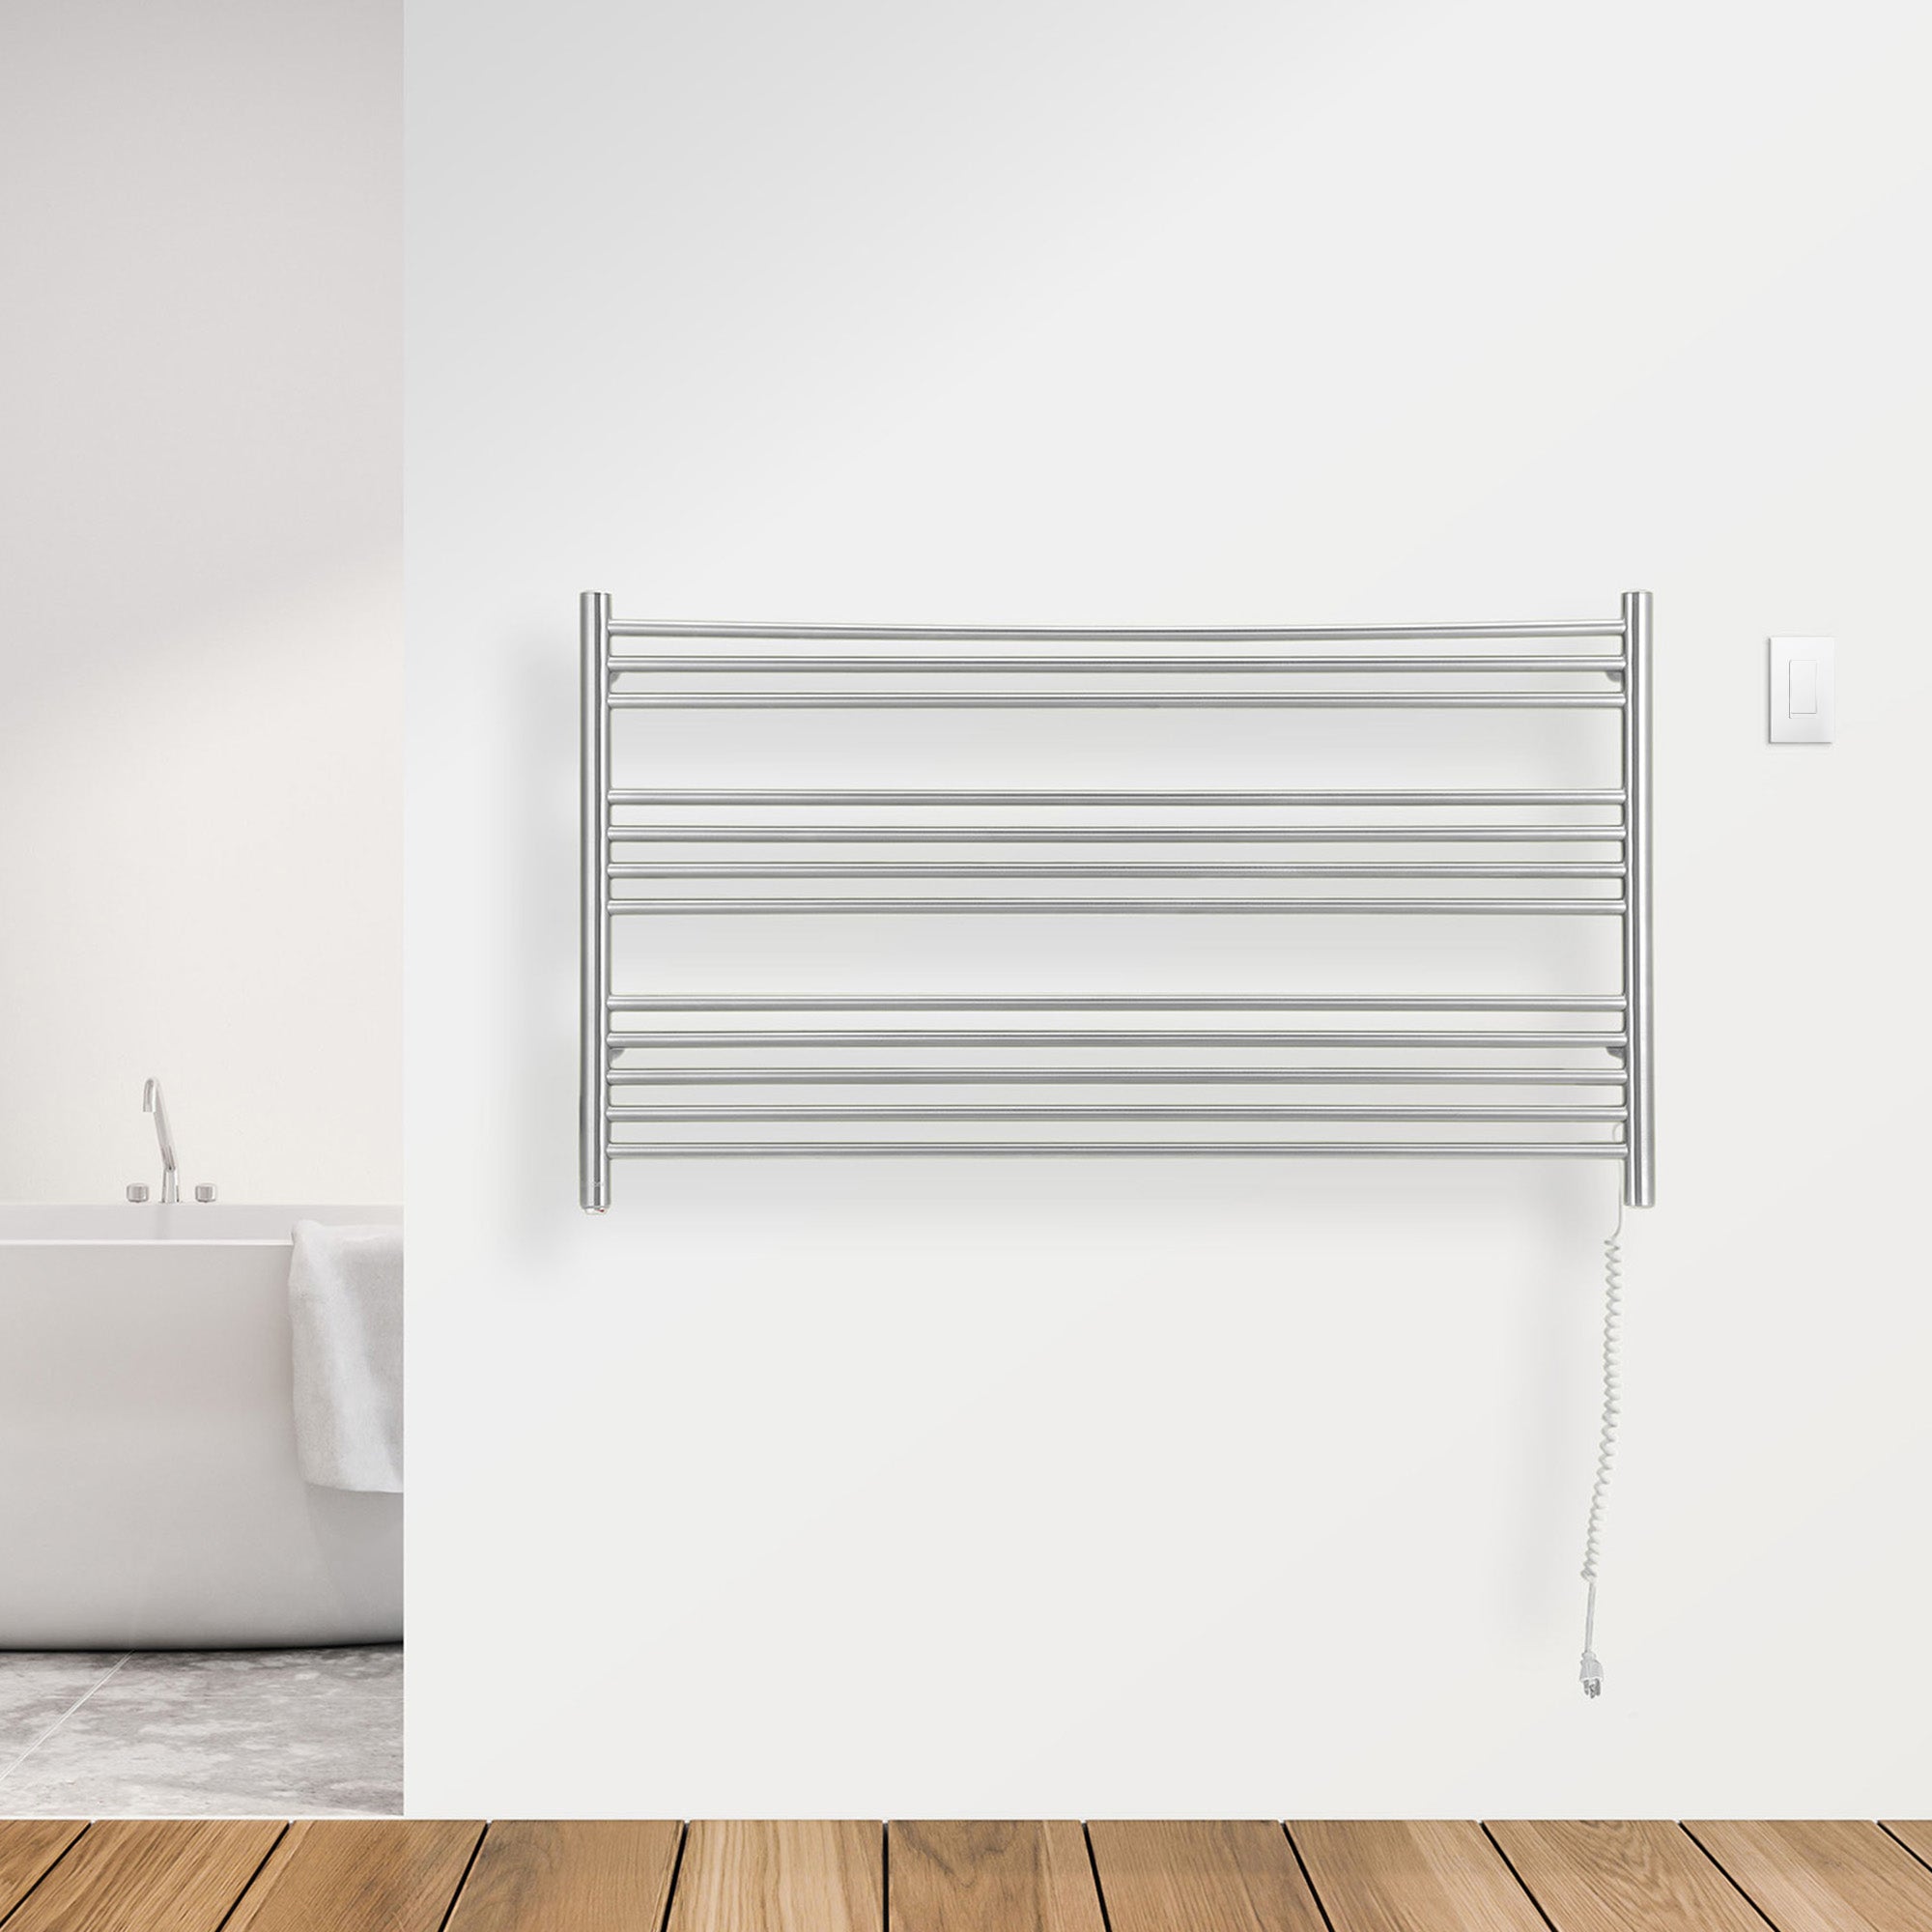 Ancona Amplia Dual 12-Bar Hardwired and Plug-in Towel Warmer in Brushed Stainless Steel with WiFi Timer